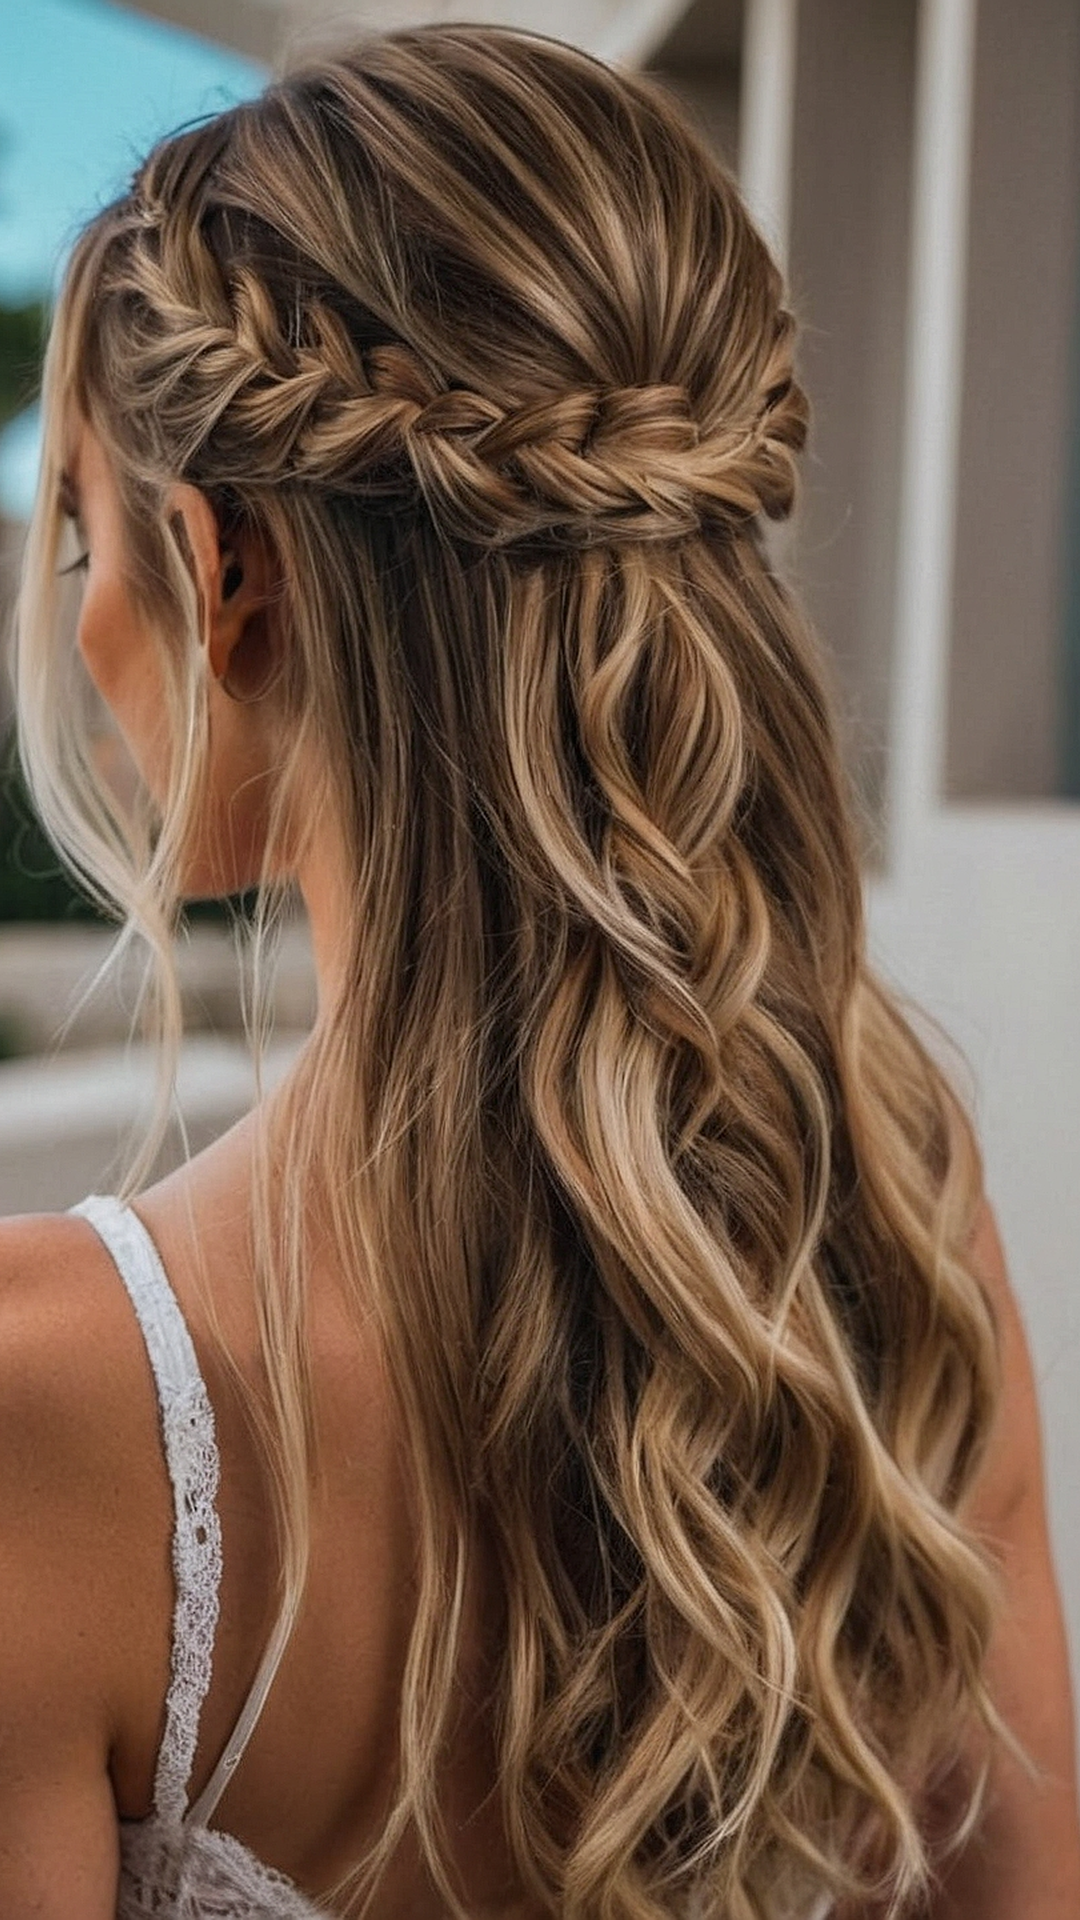 Poolside Glam: Refreshing Summer Hairstyles to Rock